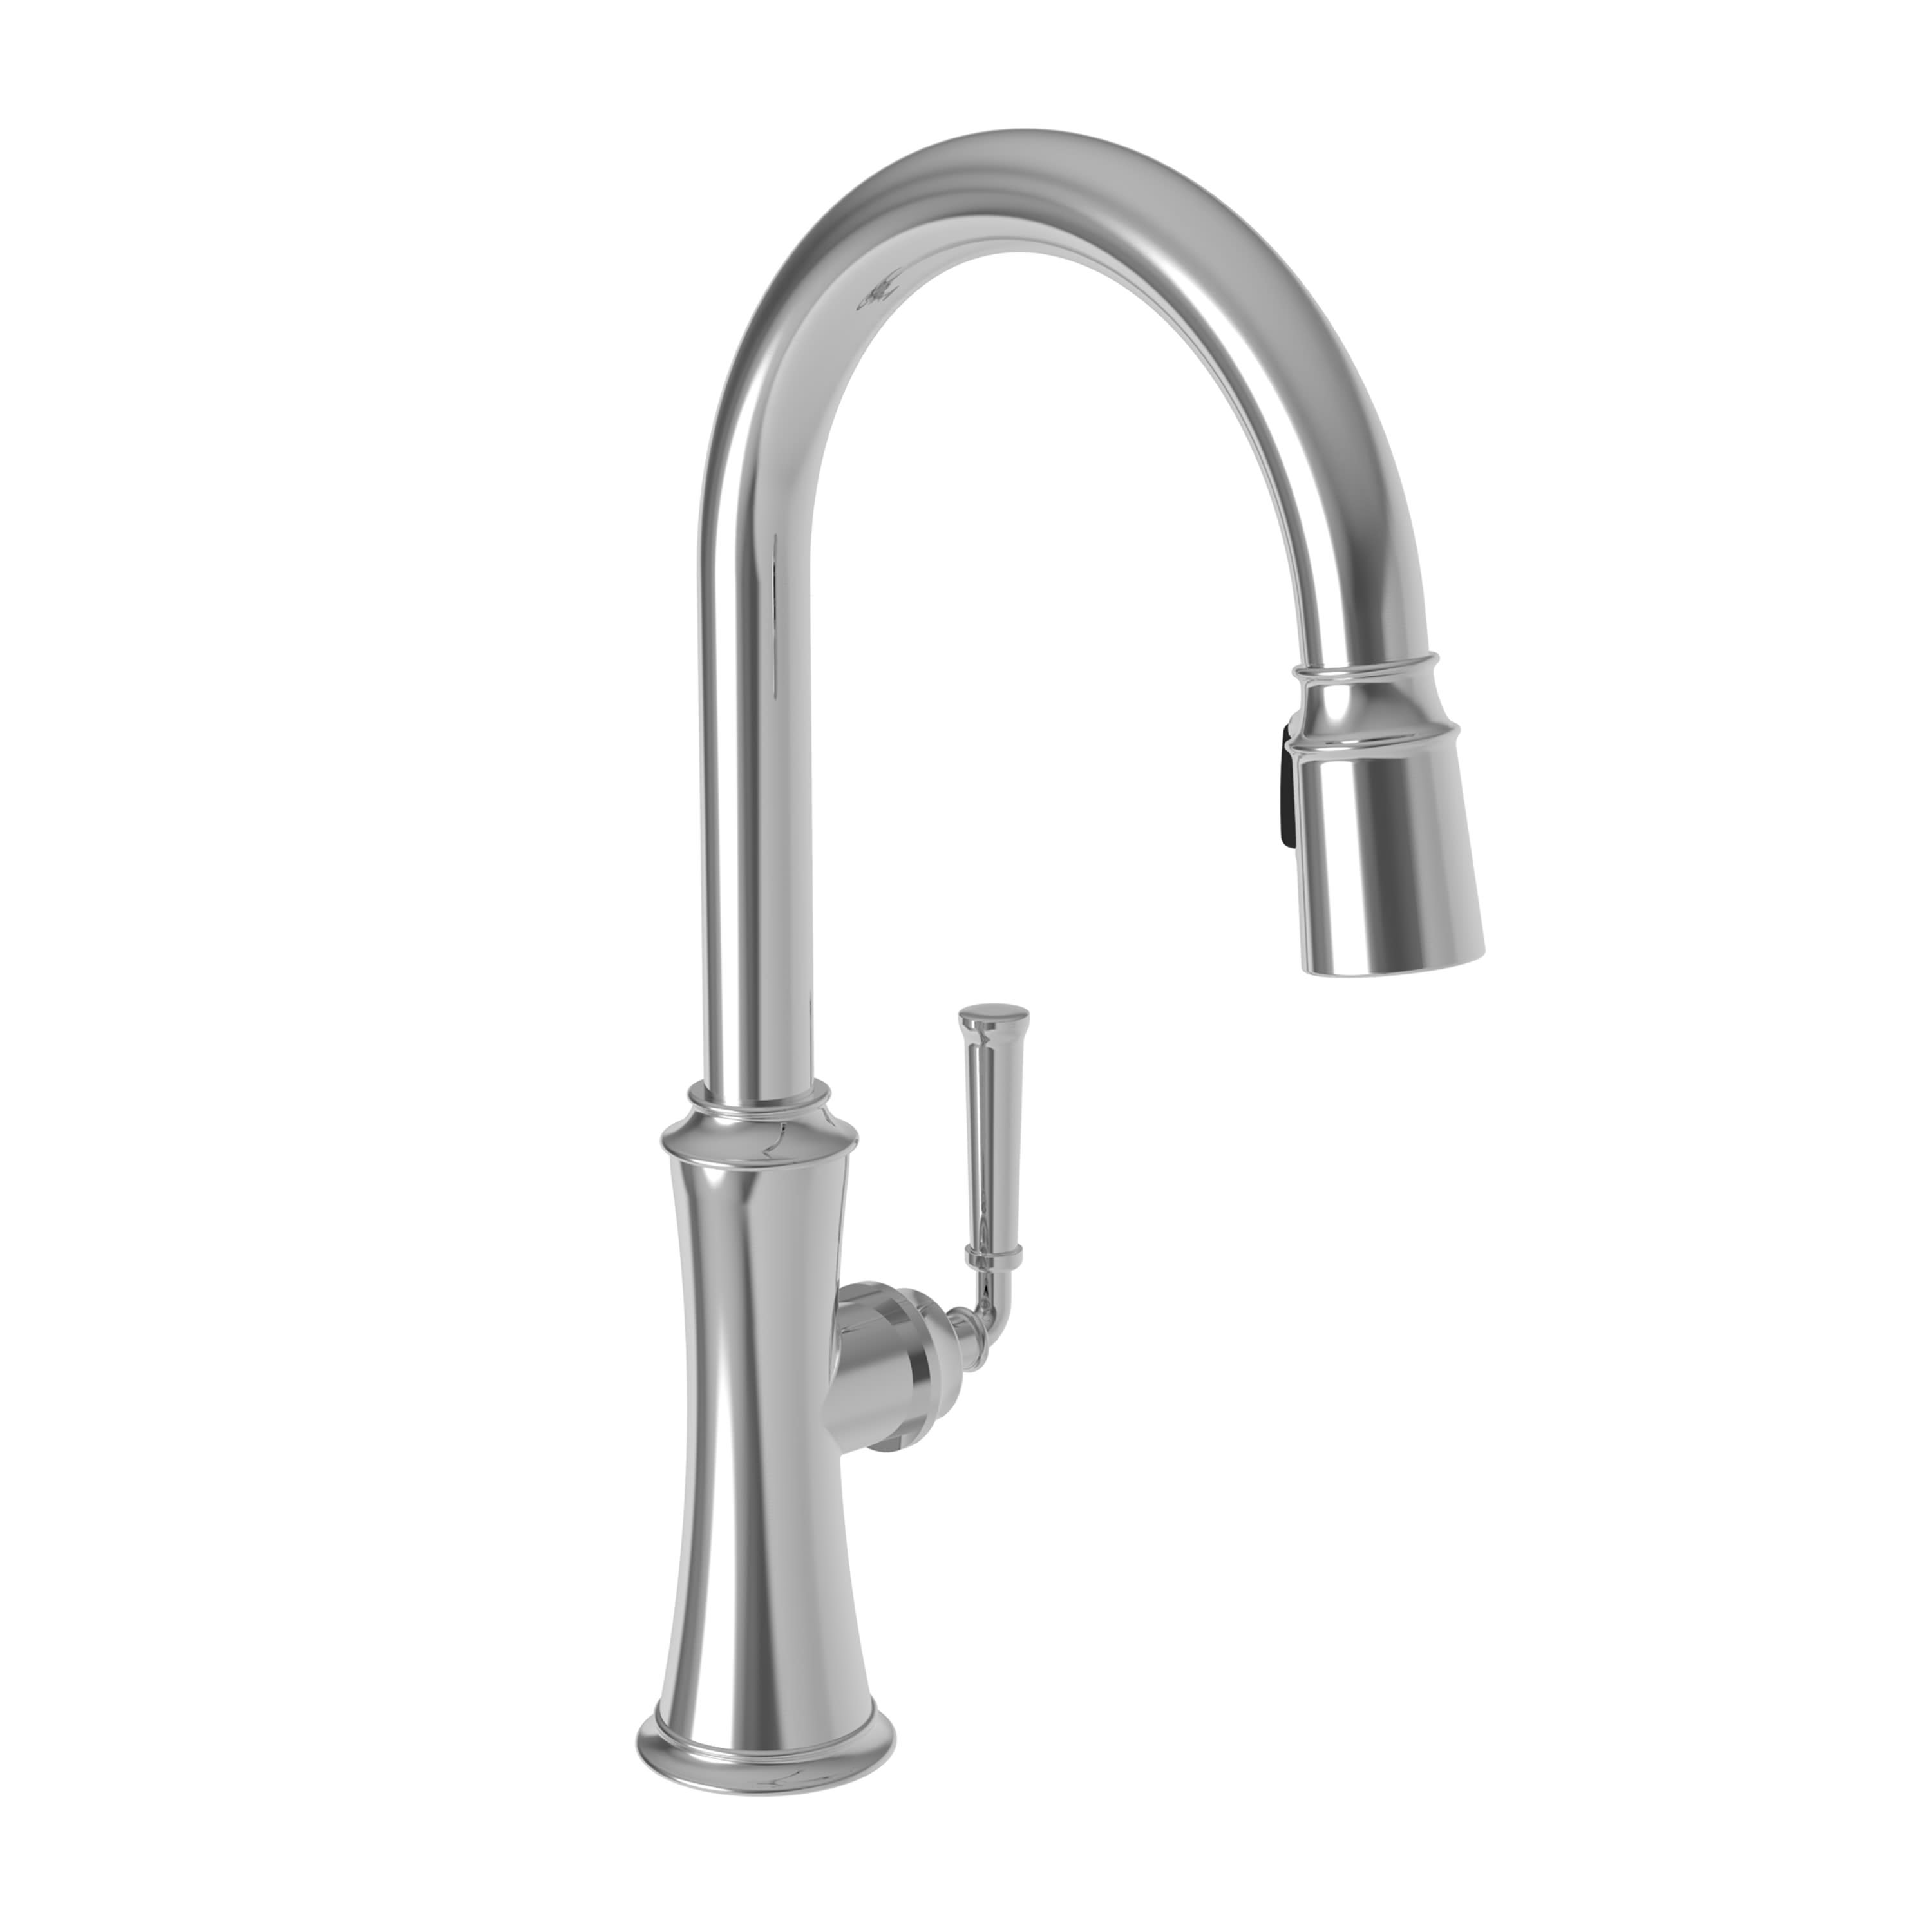 Newport Brass 2470-5103 03N Jacobean Kitchen Faucet with Metal Lever Handle and Pull-down Spray, Polished Brass - 3